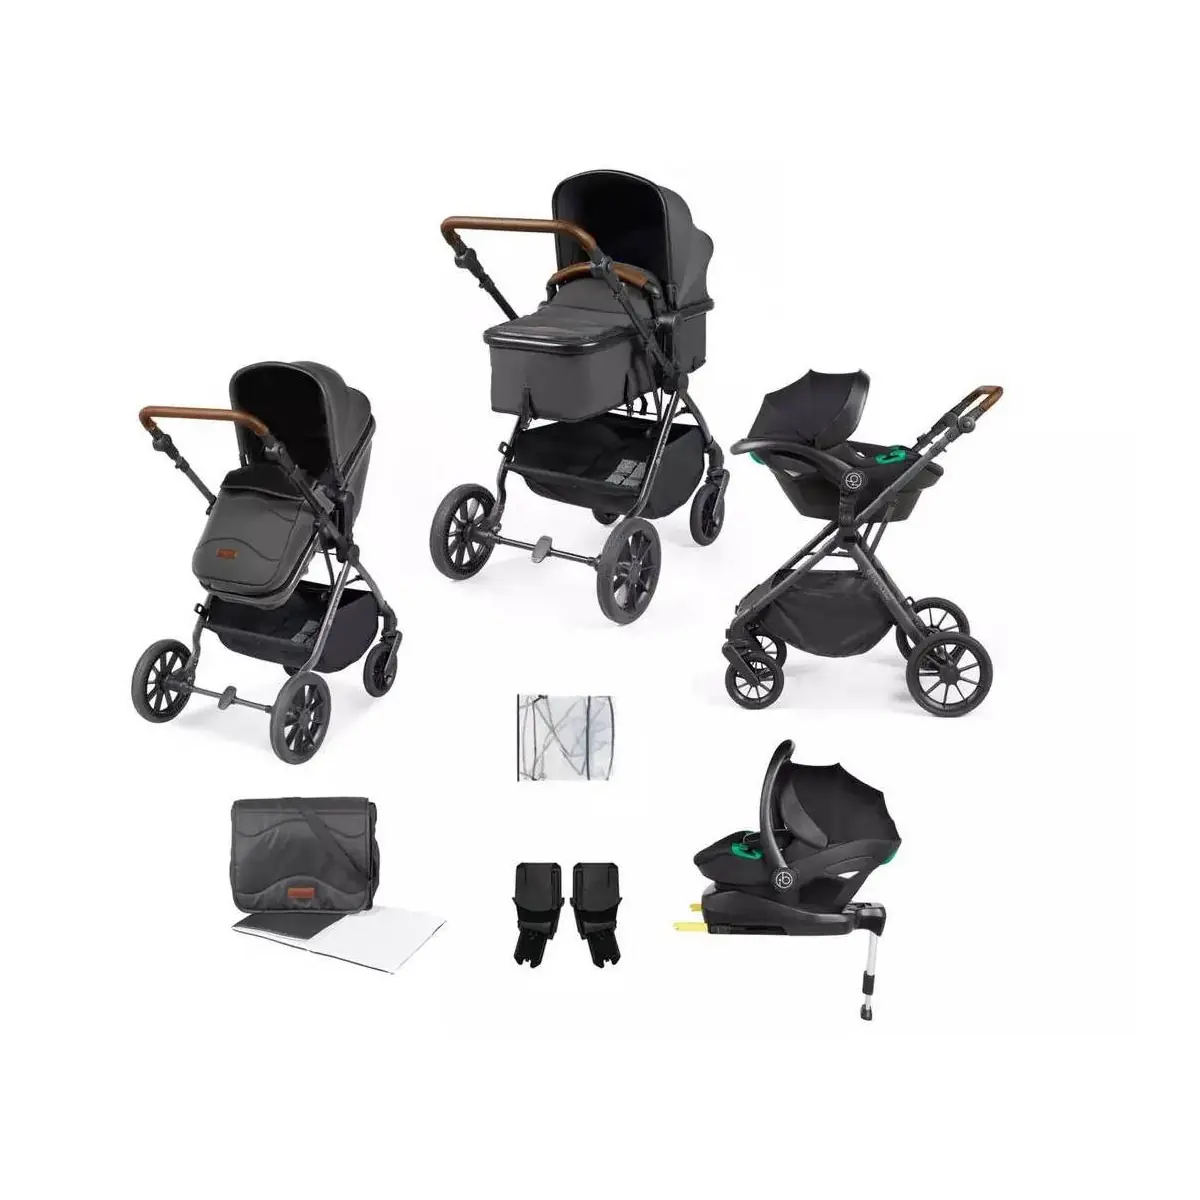 Ickle Bubba Cosmo Black Frame Travel System with Stratus i-Size Car Seat and Isofix Base - Graphite... from Kiddies Kingdom